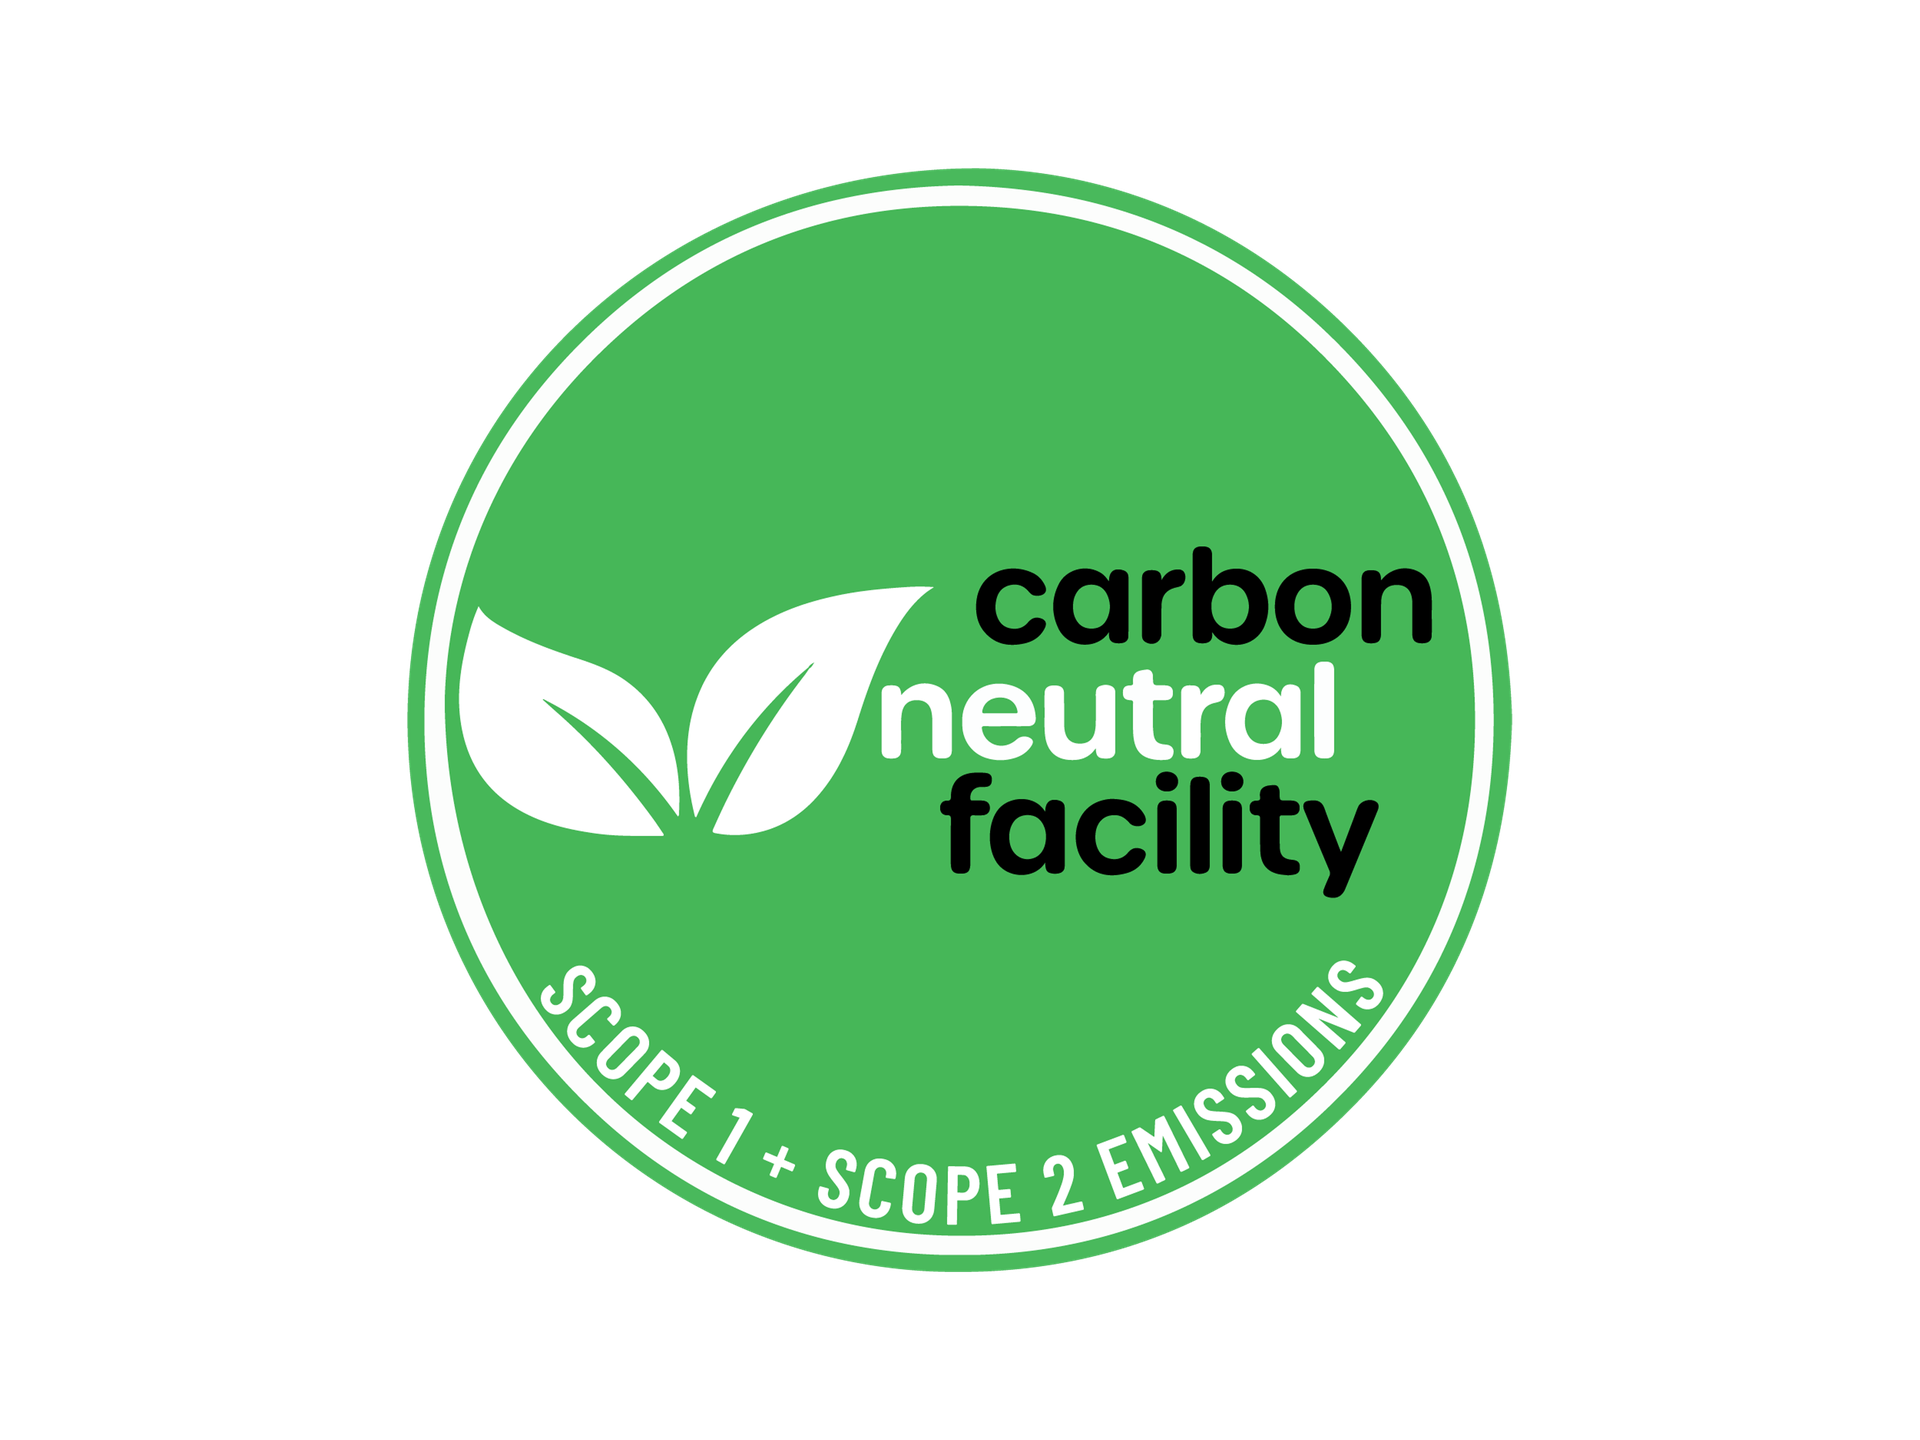 Diamond facilities are now carbon neutral (covering Scope 1 and Scope 2 emissions), with ongoing progress towards evaluating Scope 3 emissions.